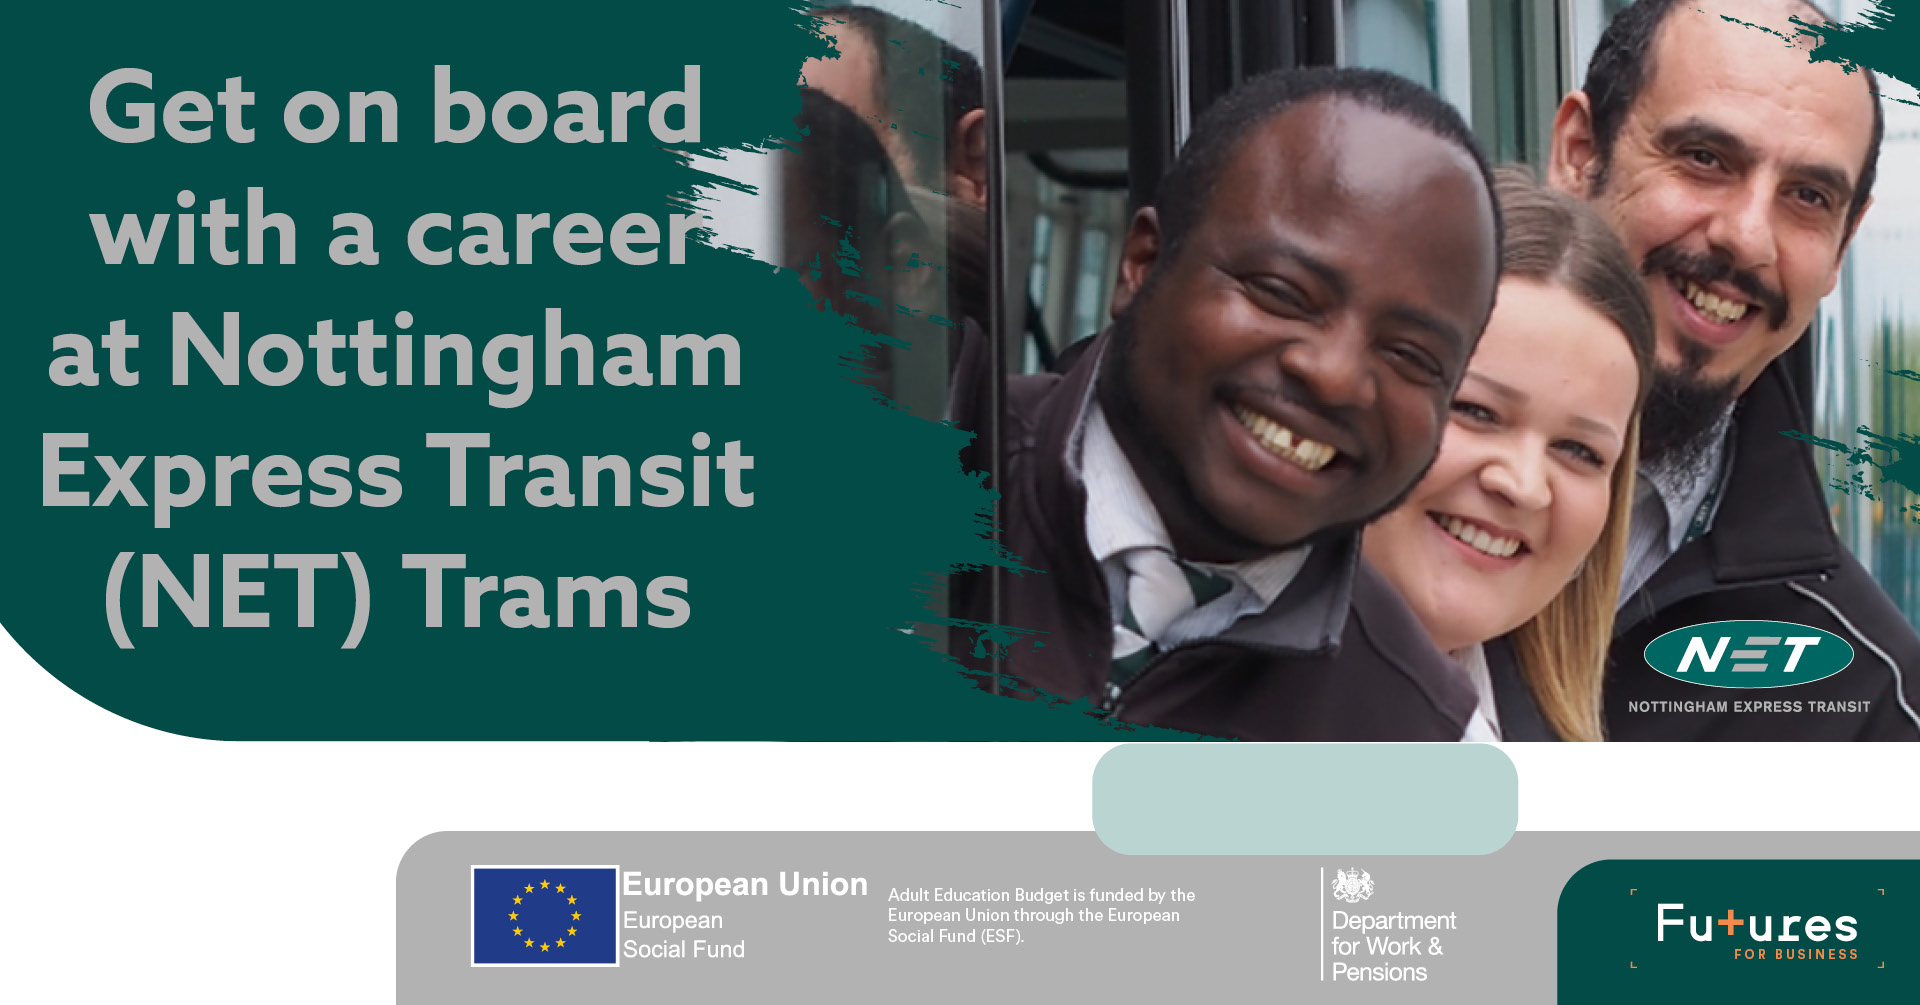 Get on board with a career at NET trams